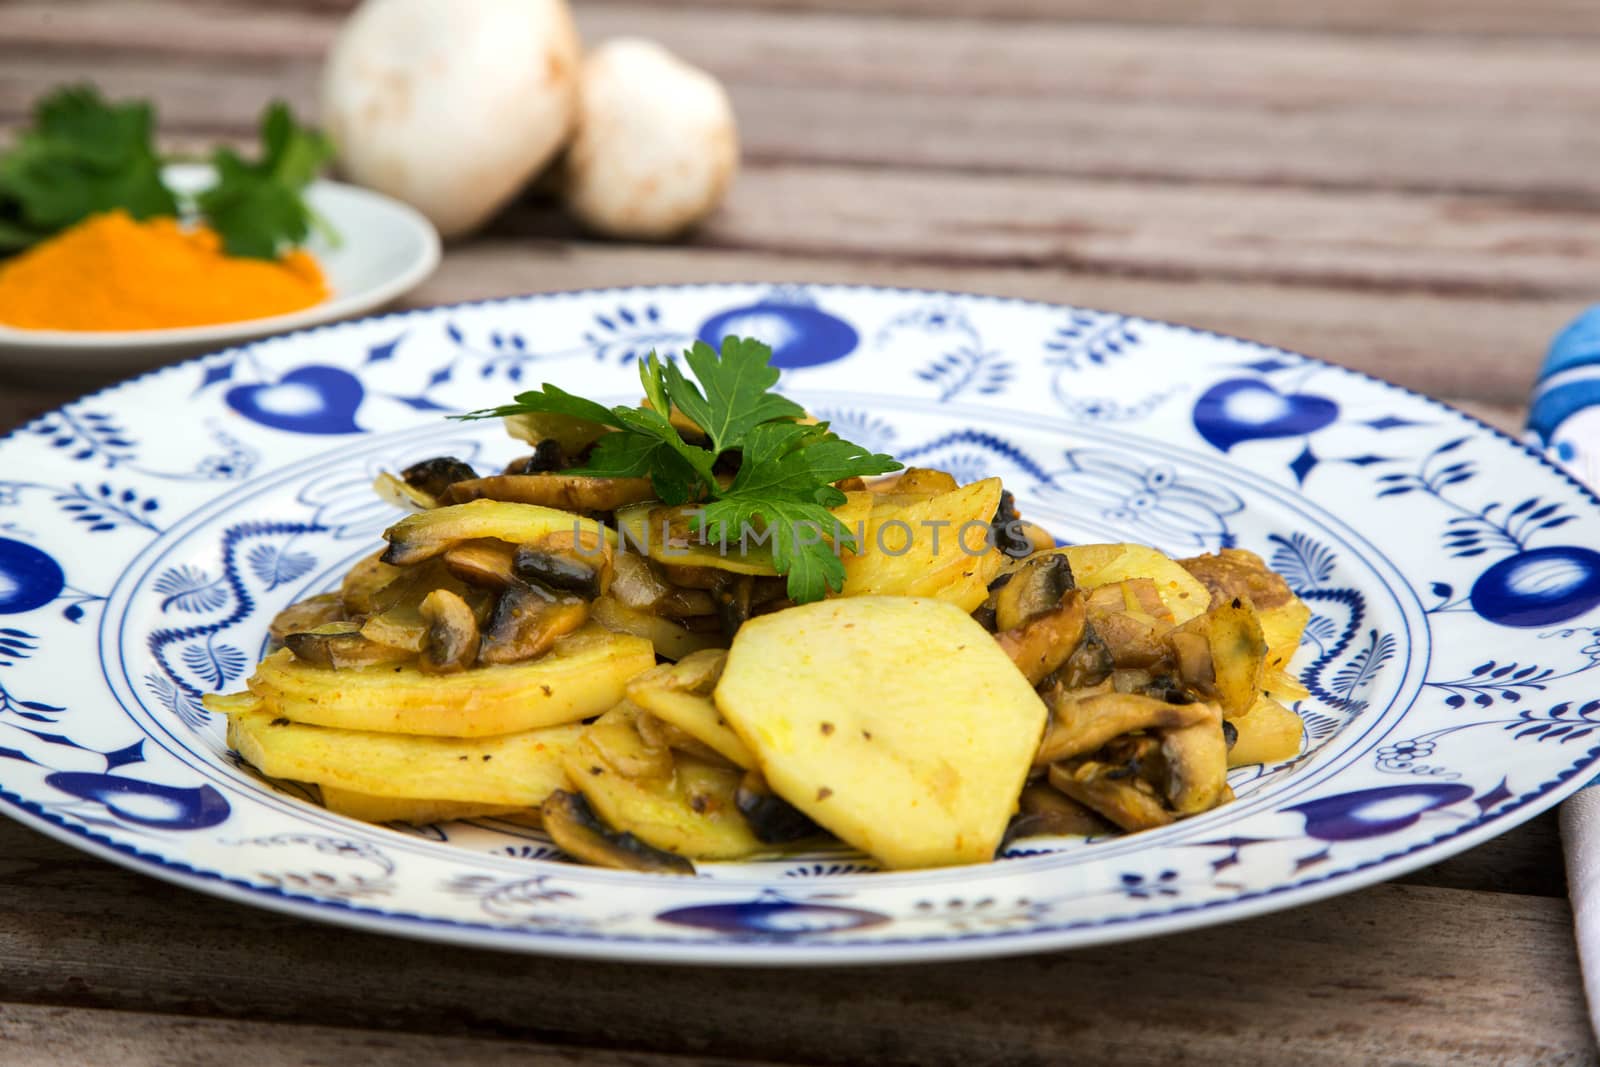 Baked potatoes with mushrooms and curcuma by tolikoff_photography